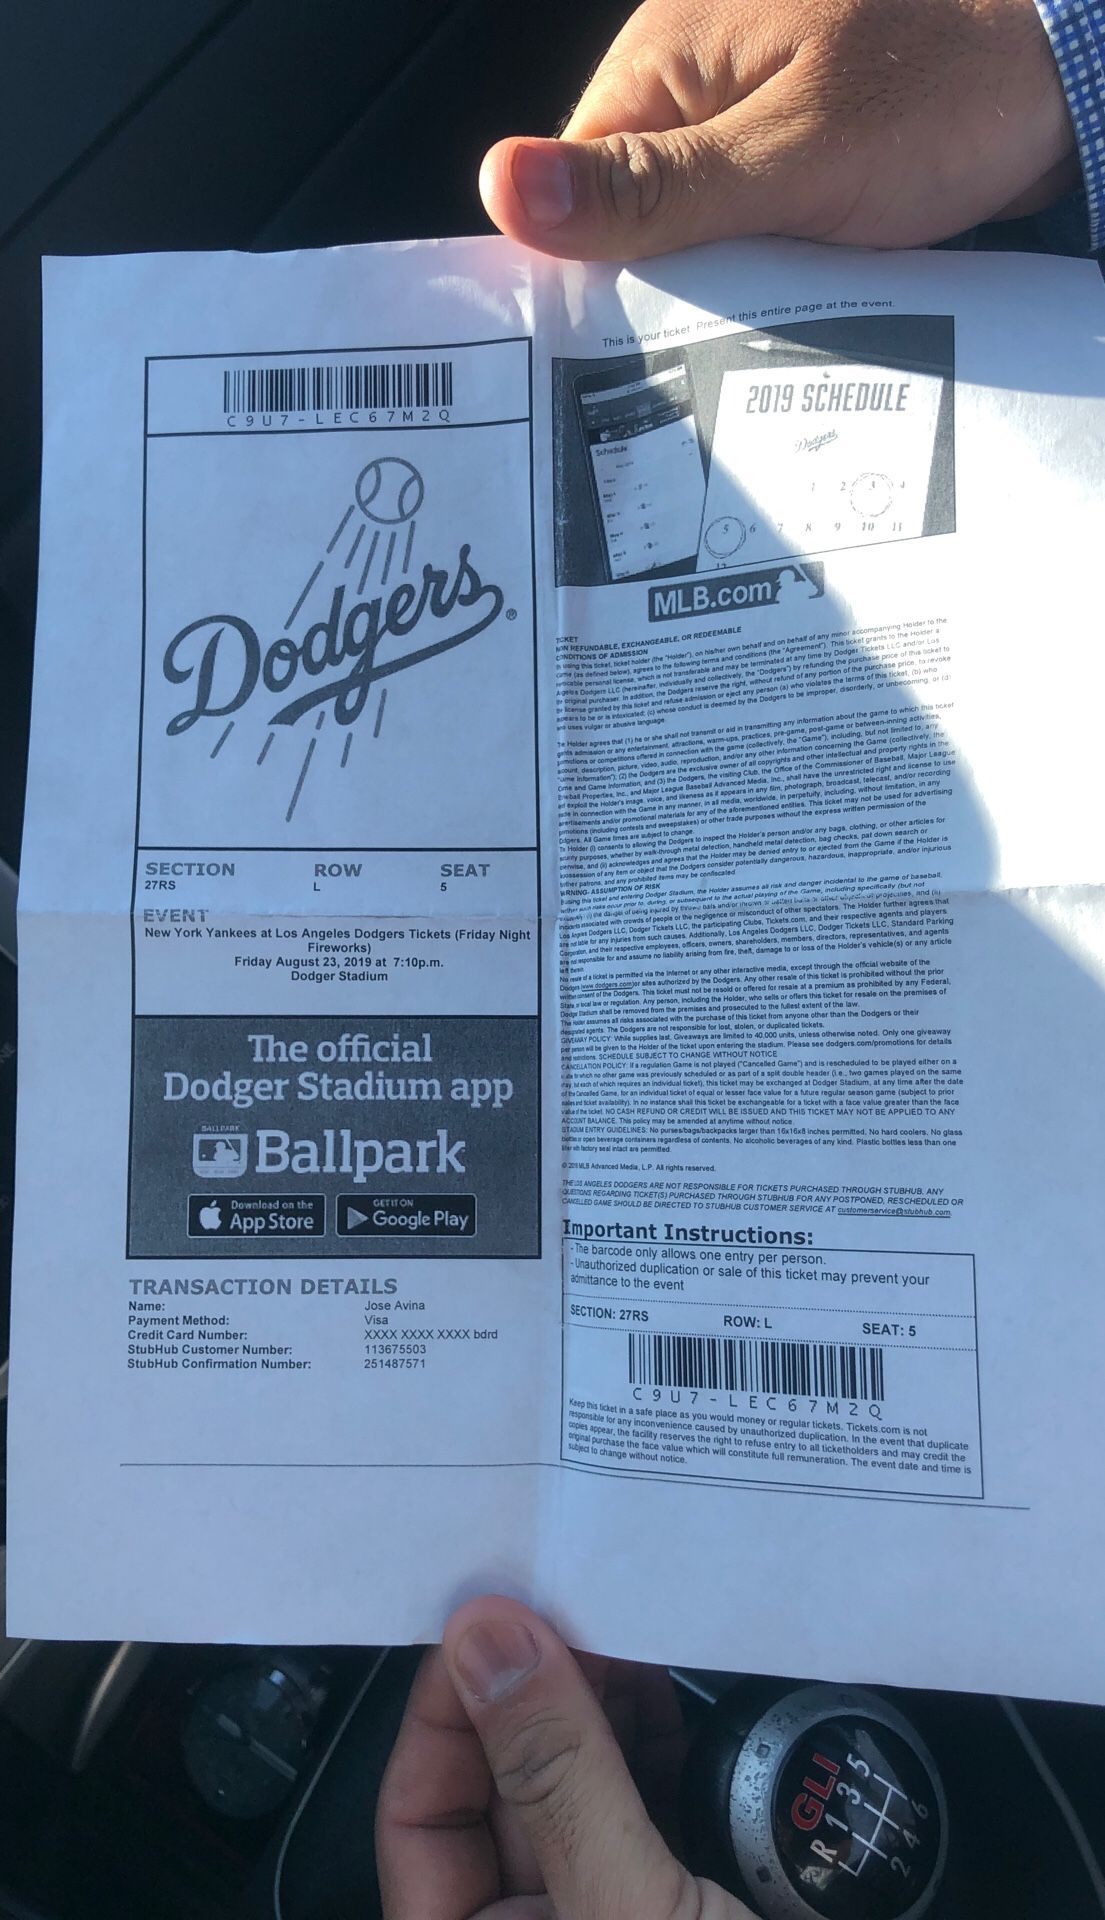 Dodgers Yankees tonight only 1 ticket.